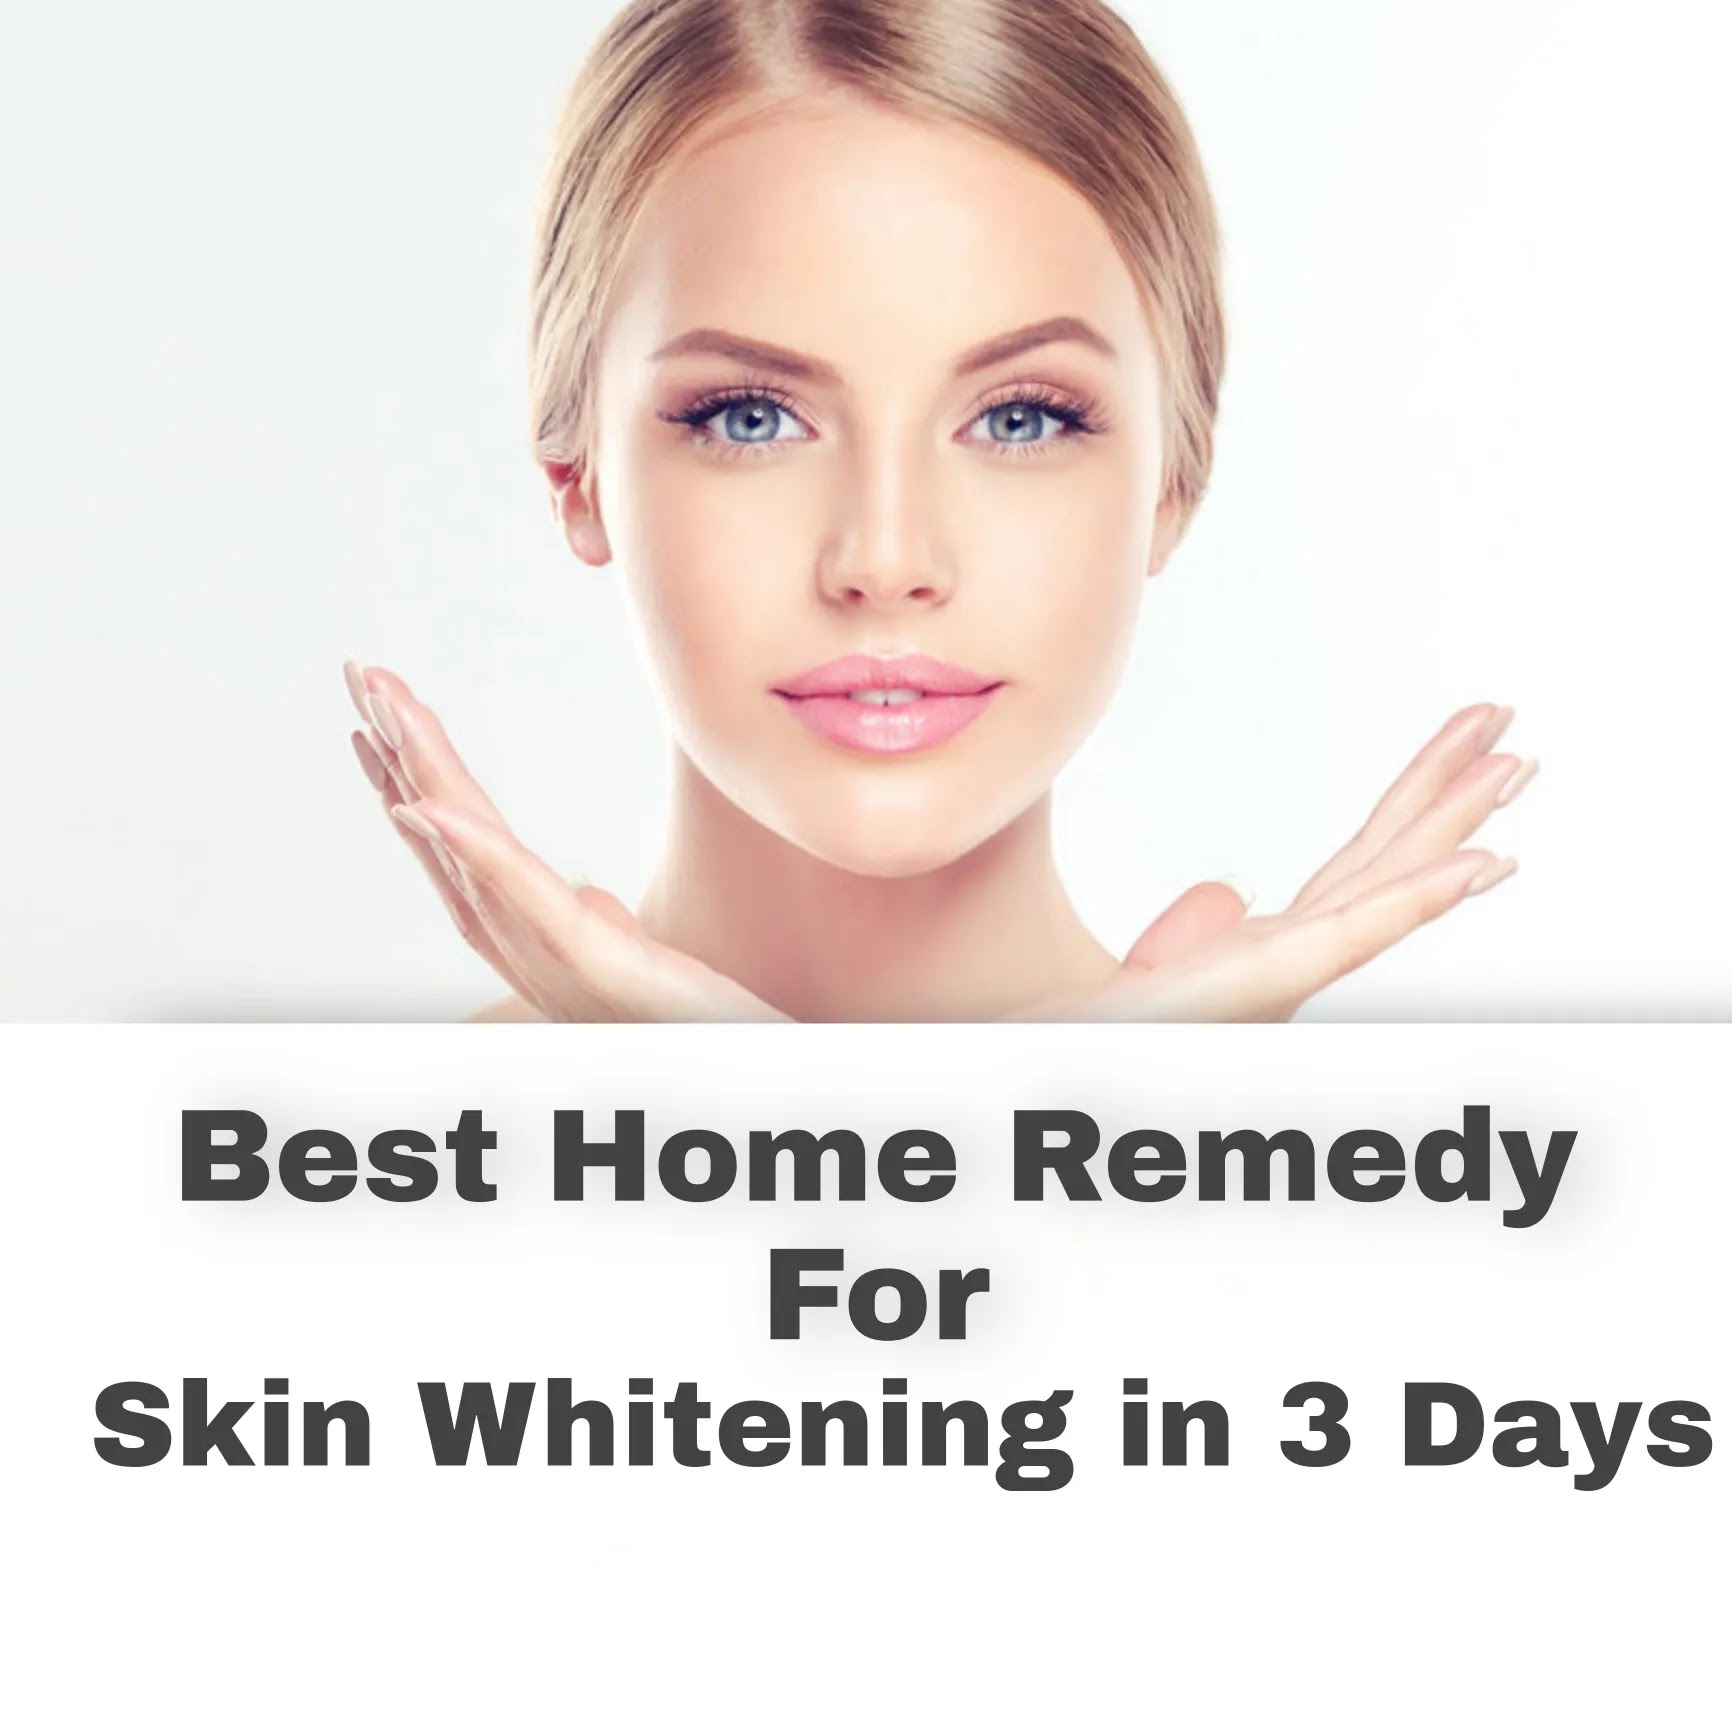 Best Home Remedy for Skin Whitening in 3 Days